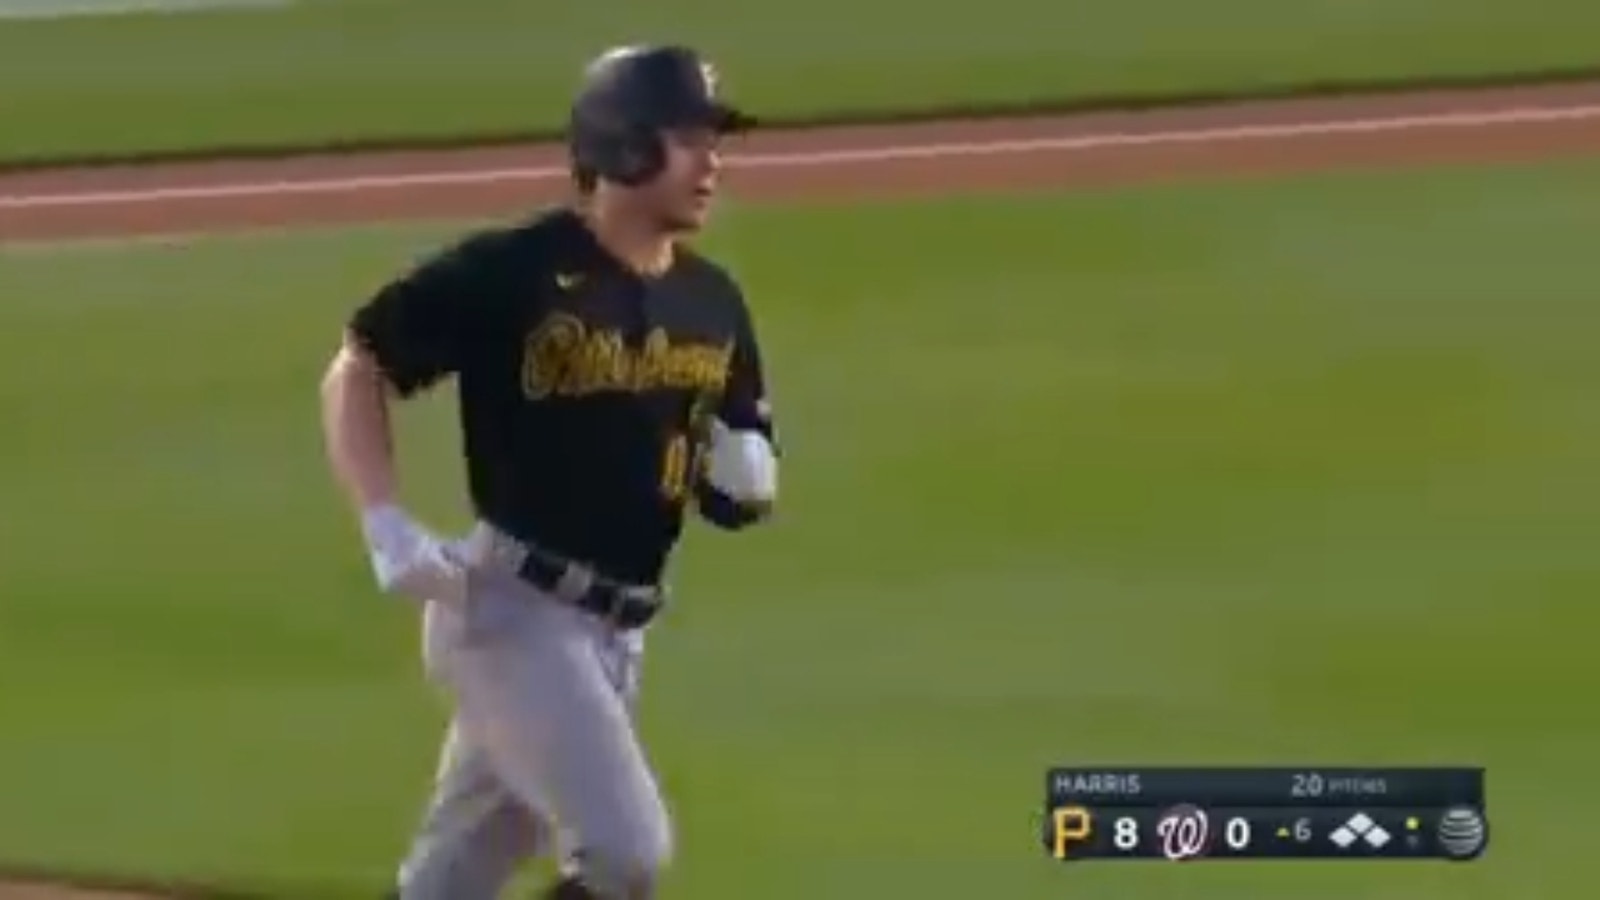 Jack Suwinski smashes grand slam to extend Pirates' lead over Nationals